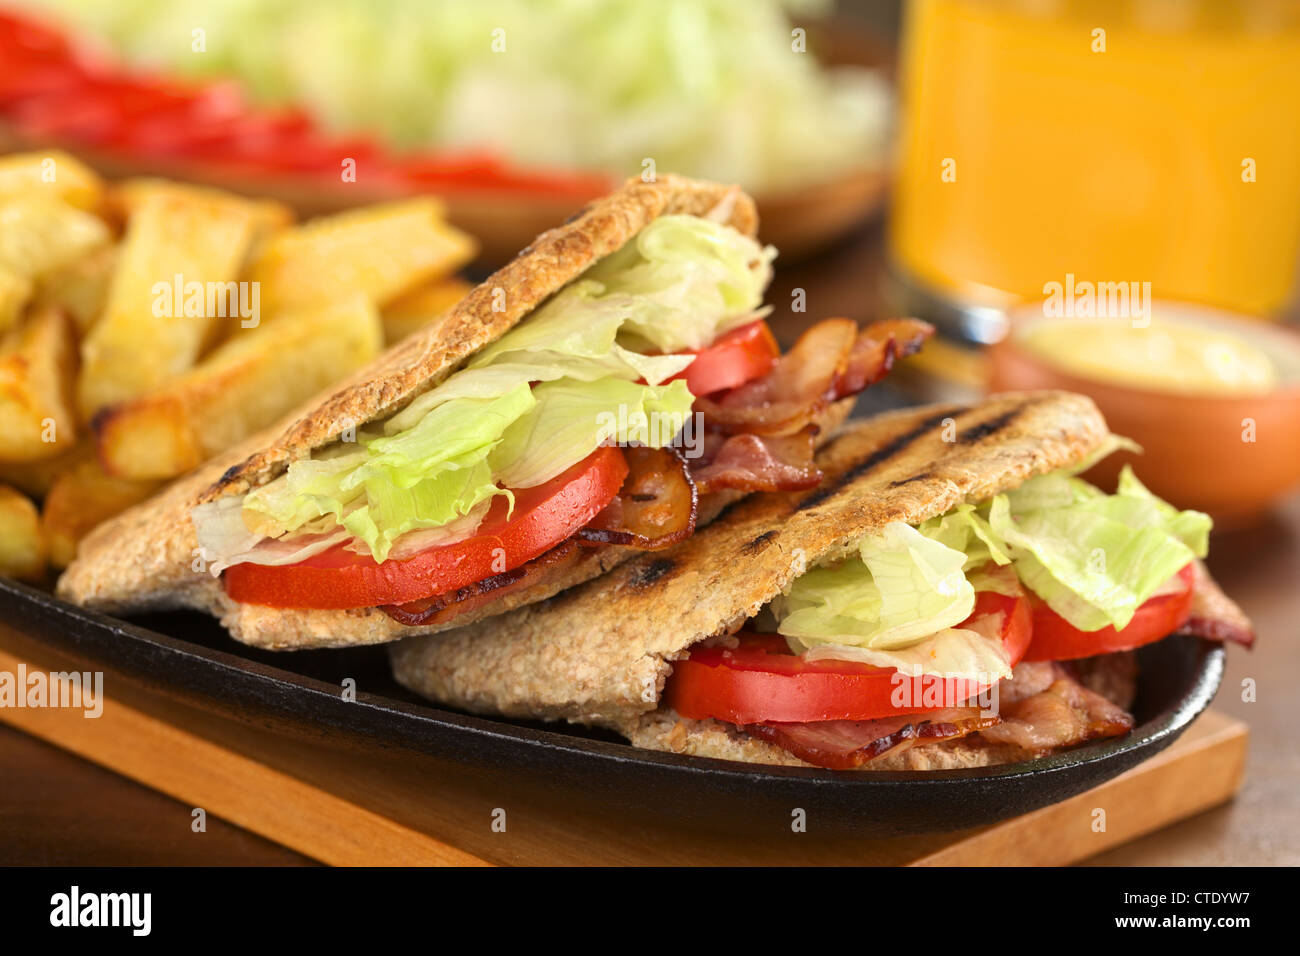 BLT (bacon, lettuce, tomato) wholewheat pita sandwich with French fries Stock Photo